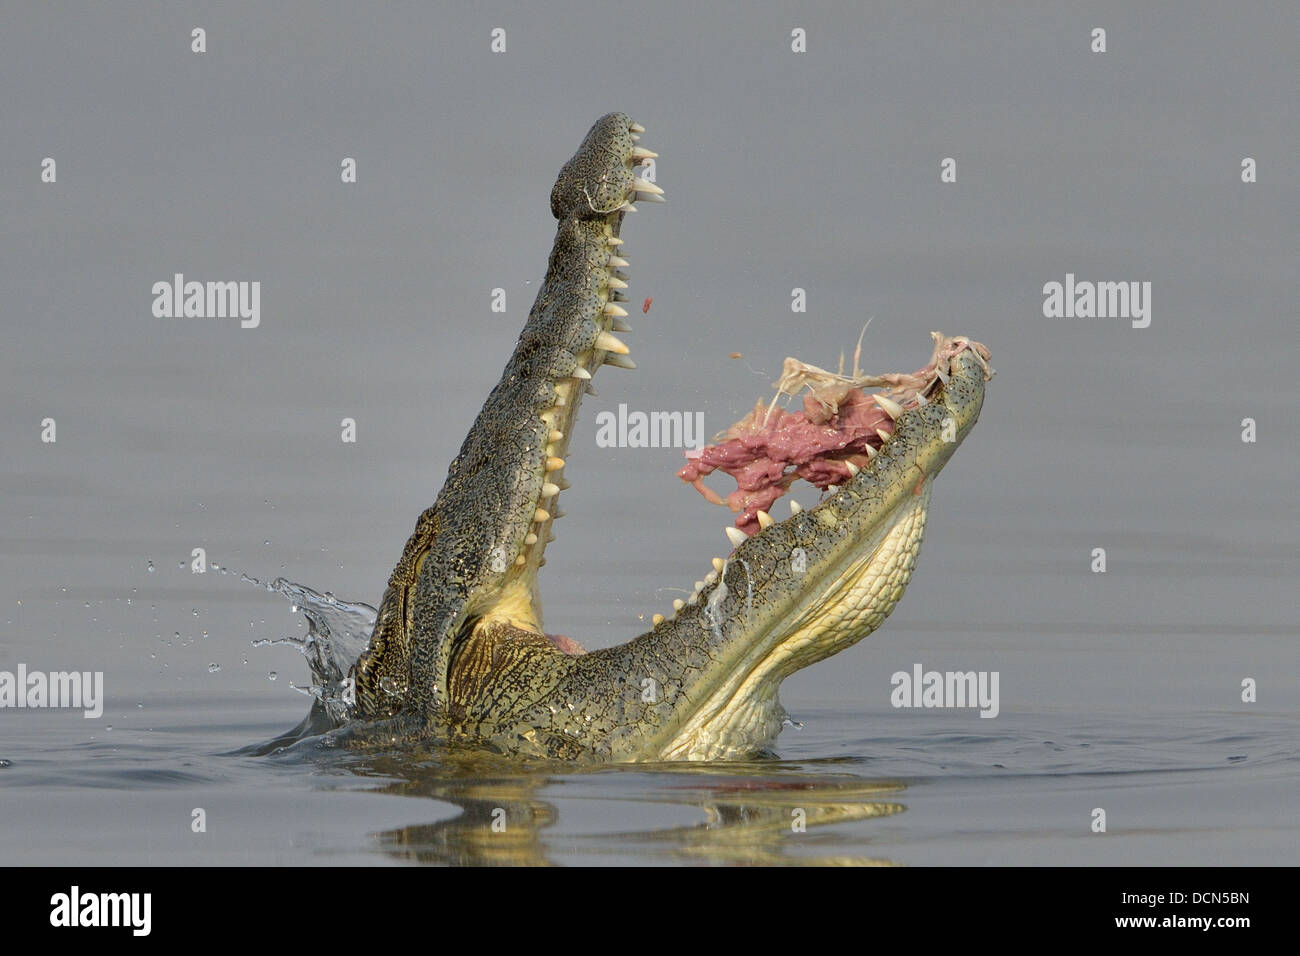 Nile Crocodile eating a fish in the river Stock Photo